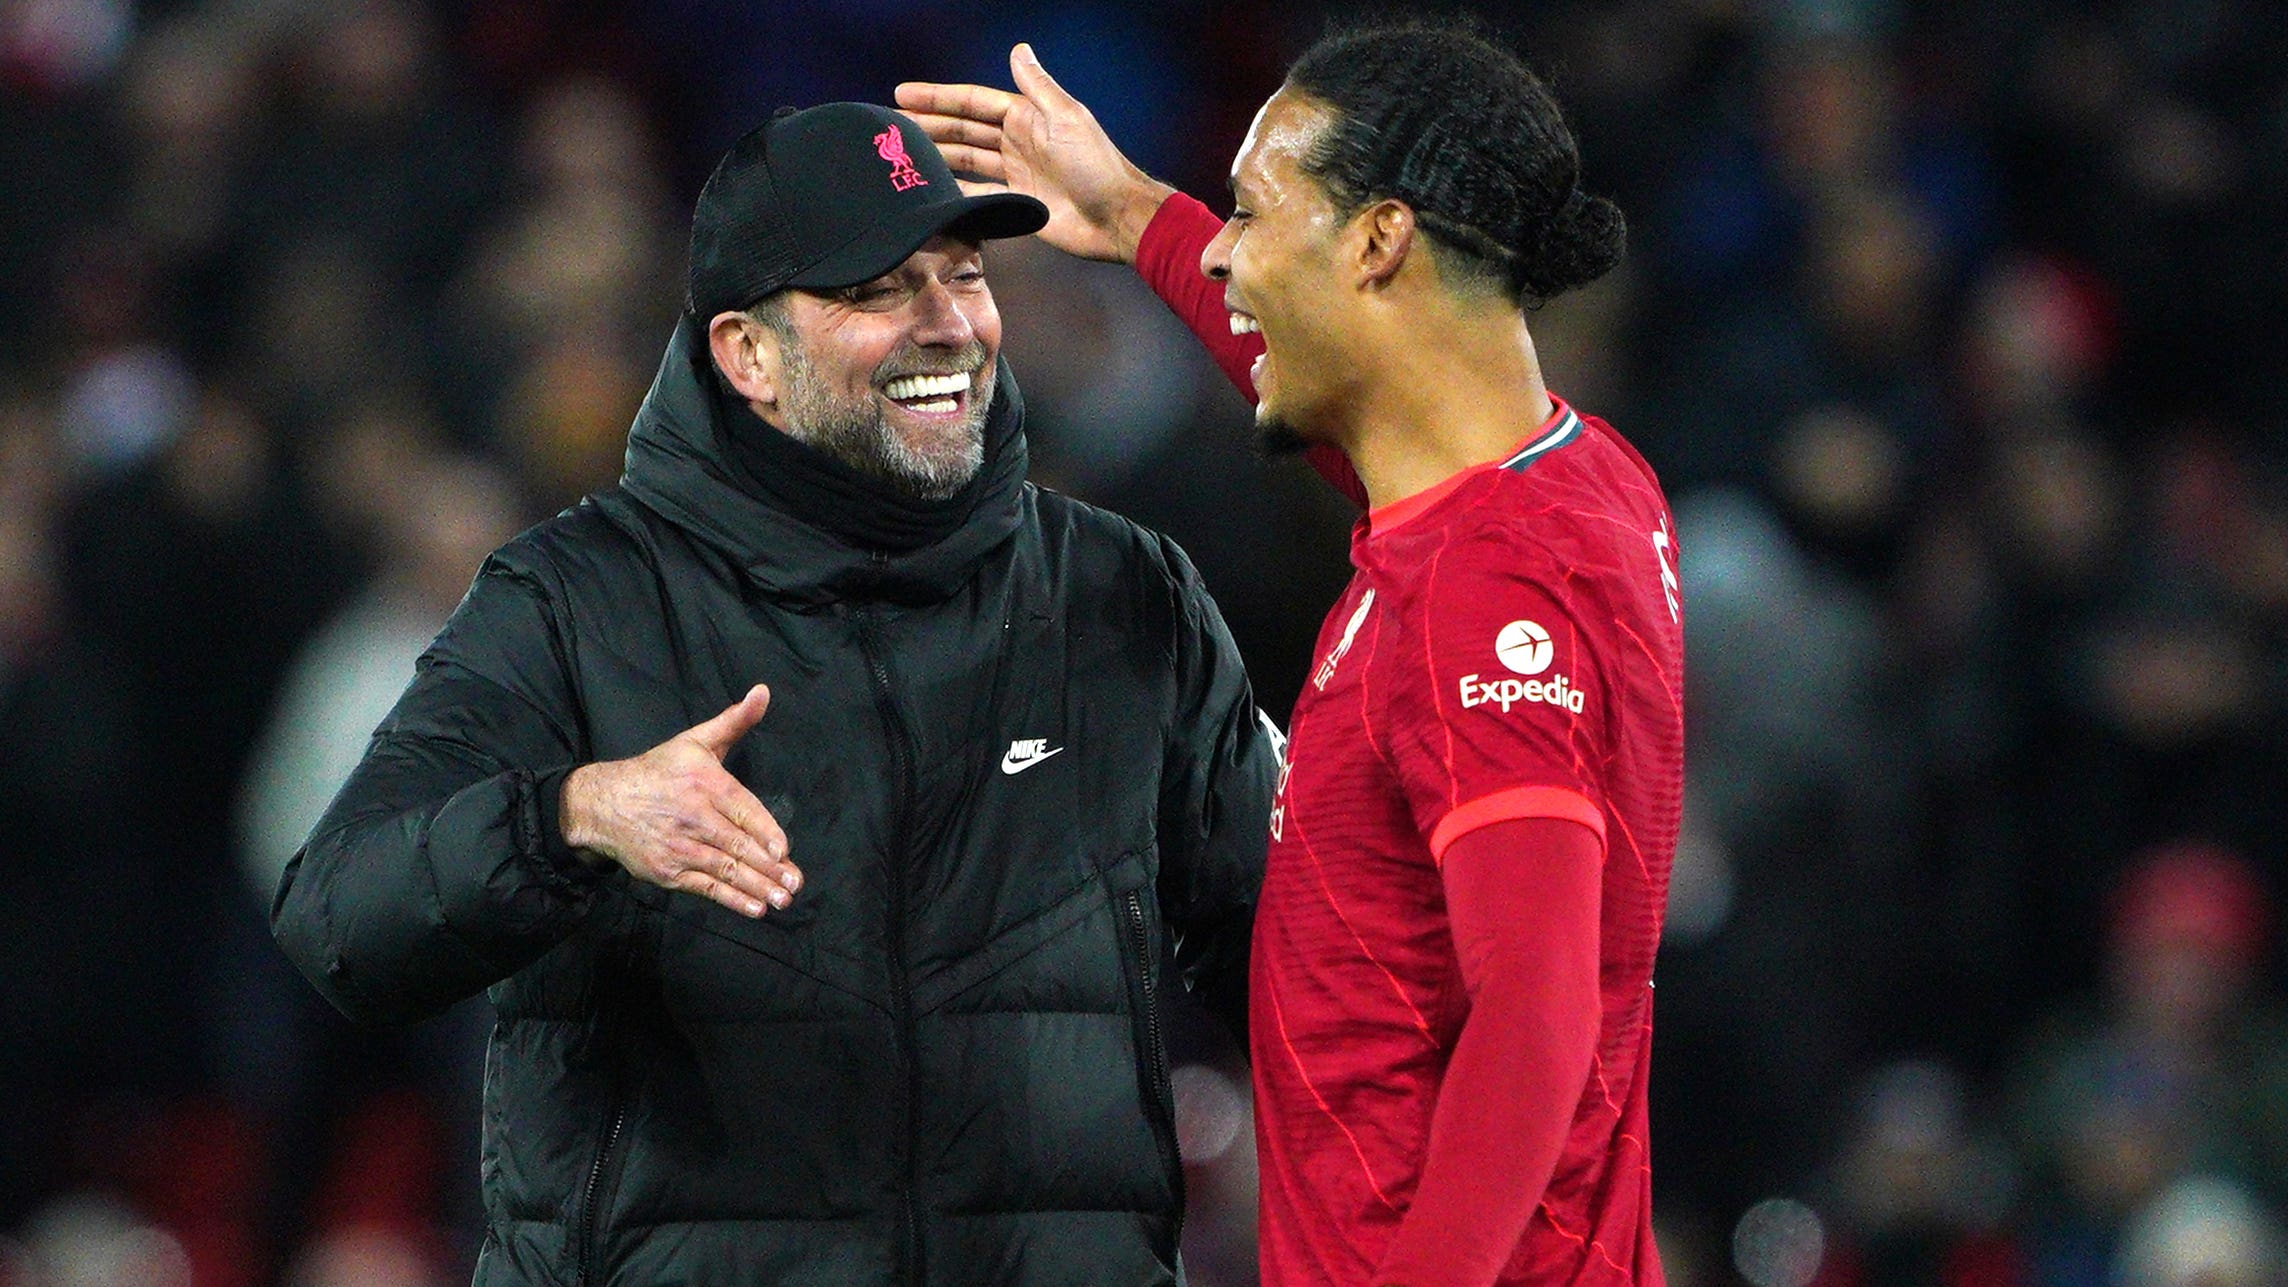 Don’t get it twisted, I’m fully committed to Liverpool – Virgil van Dijk